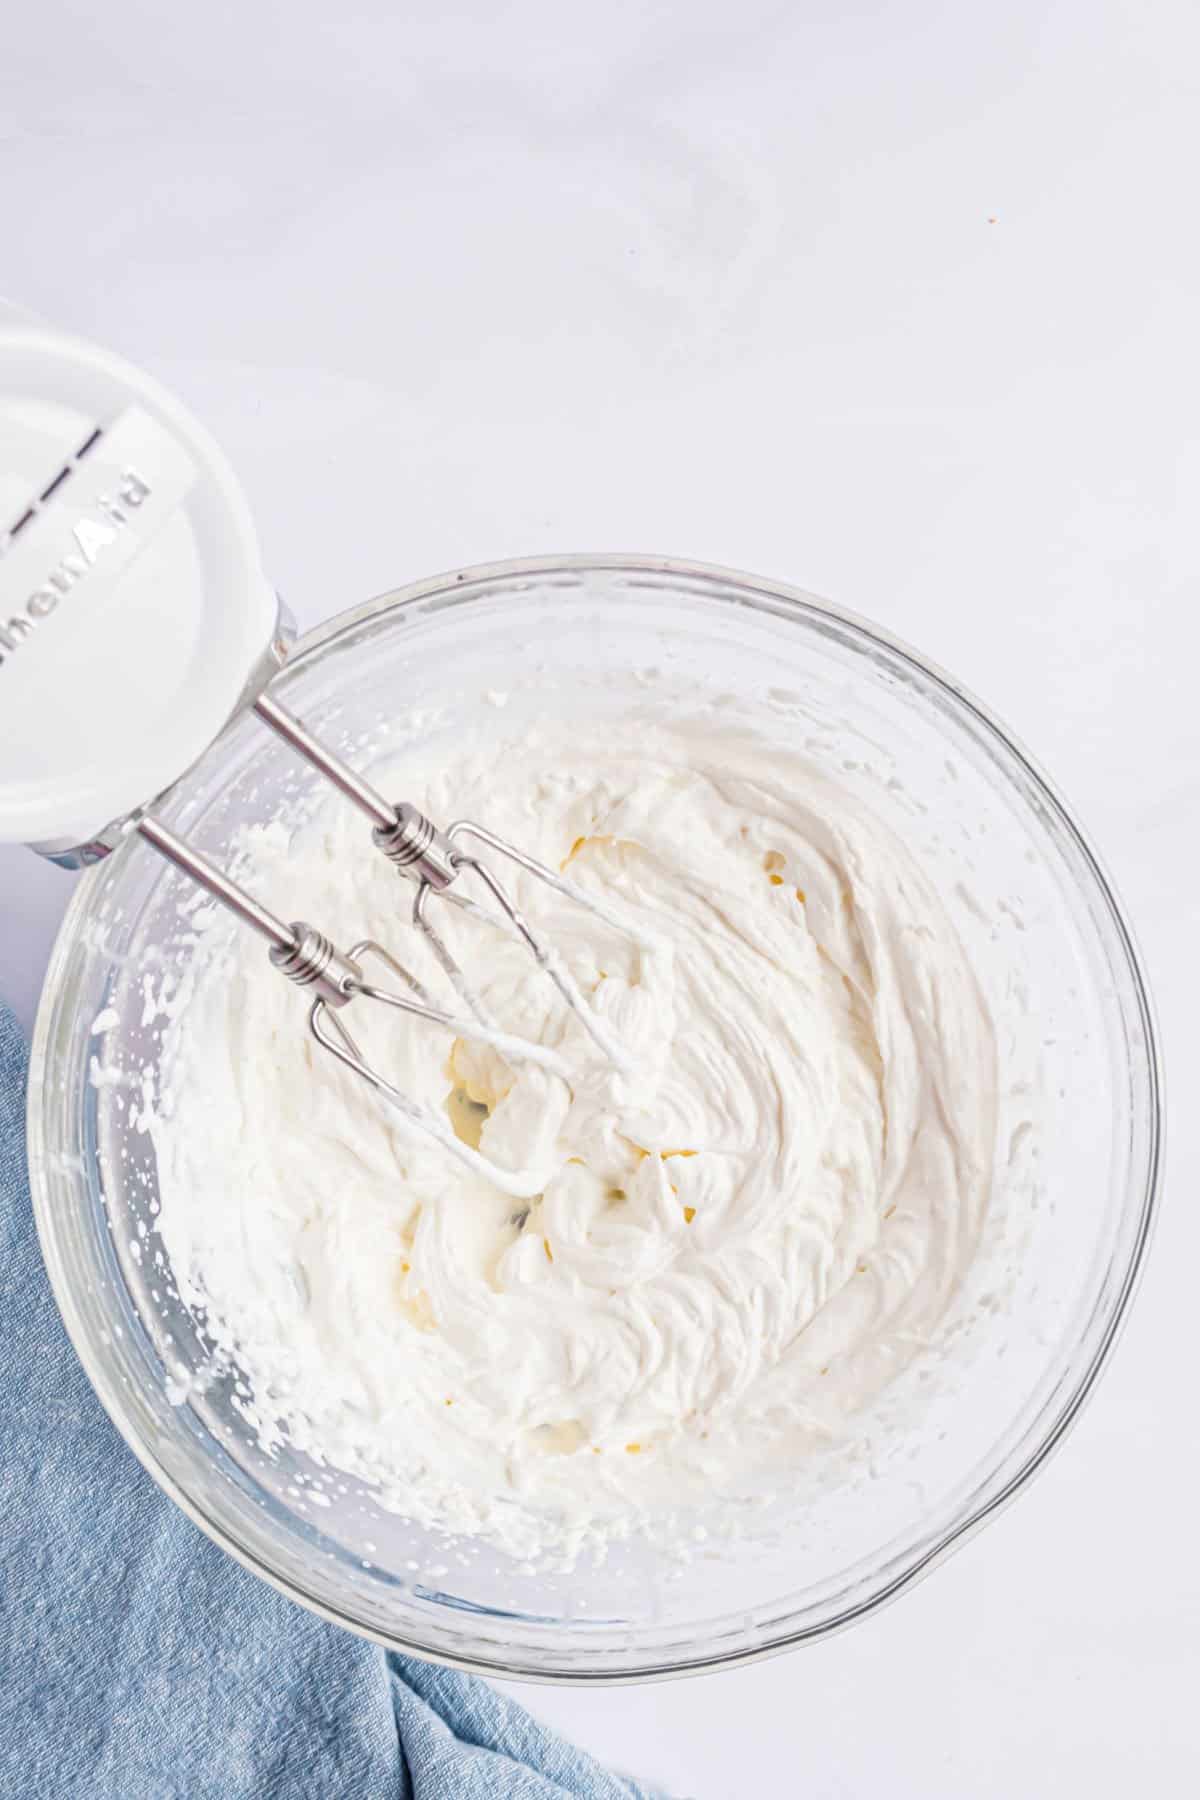 Stabilized whipped cream in clear glass mixing bowl with hand mixer.